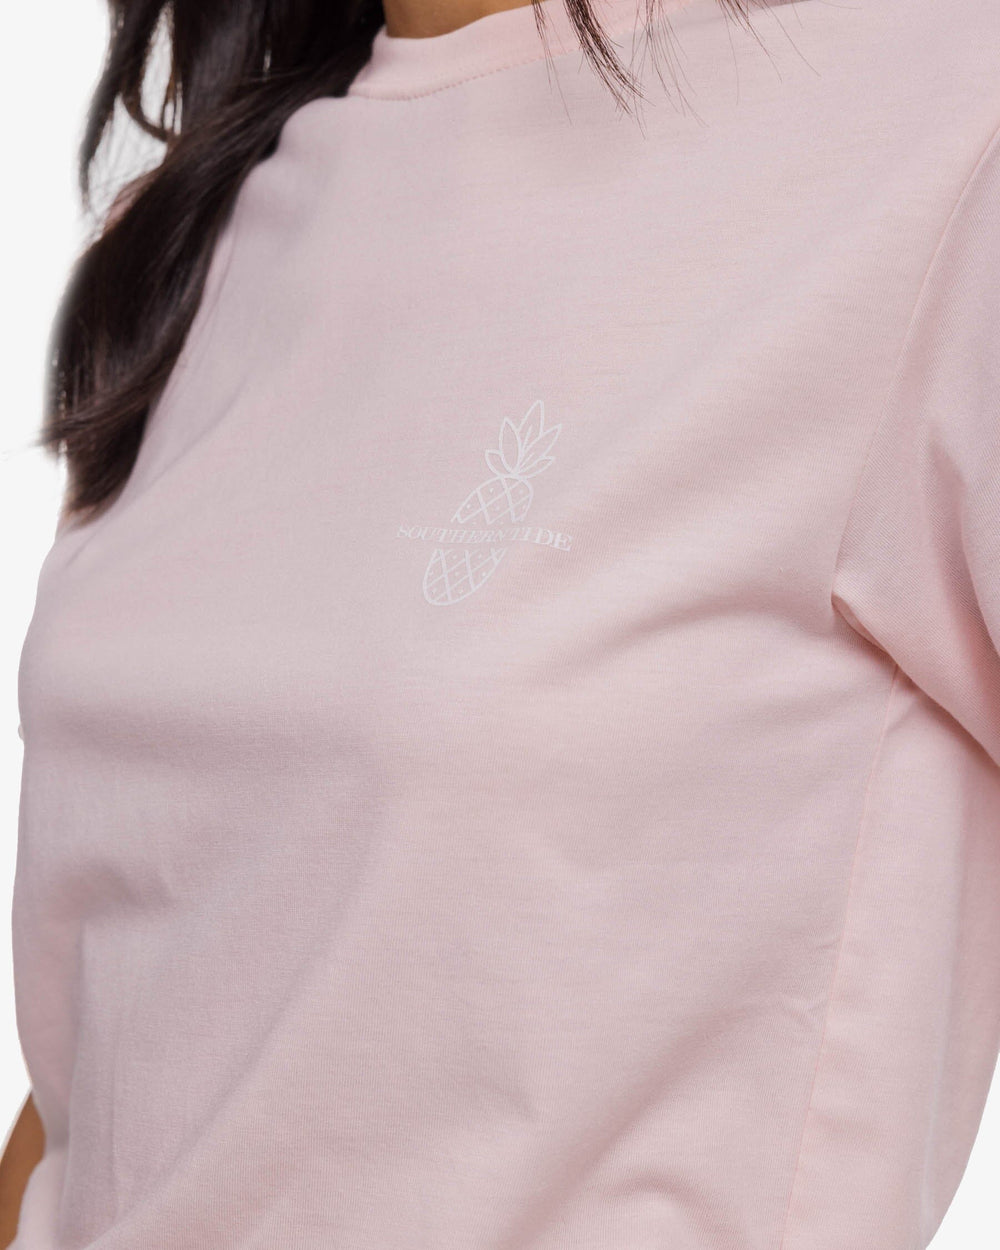 The detail view of the Southern Tide Southern Hospitality T-shirt by Southern Tide - Rose Blush